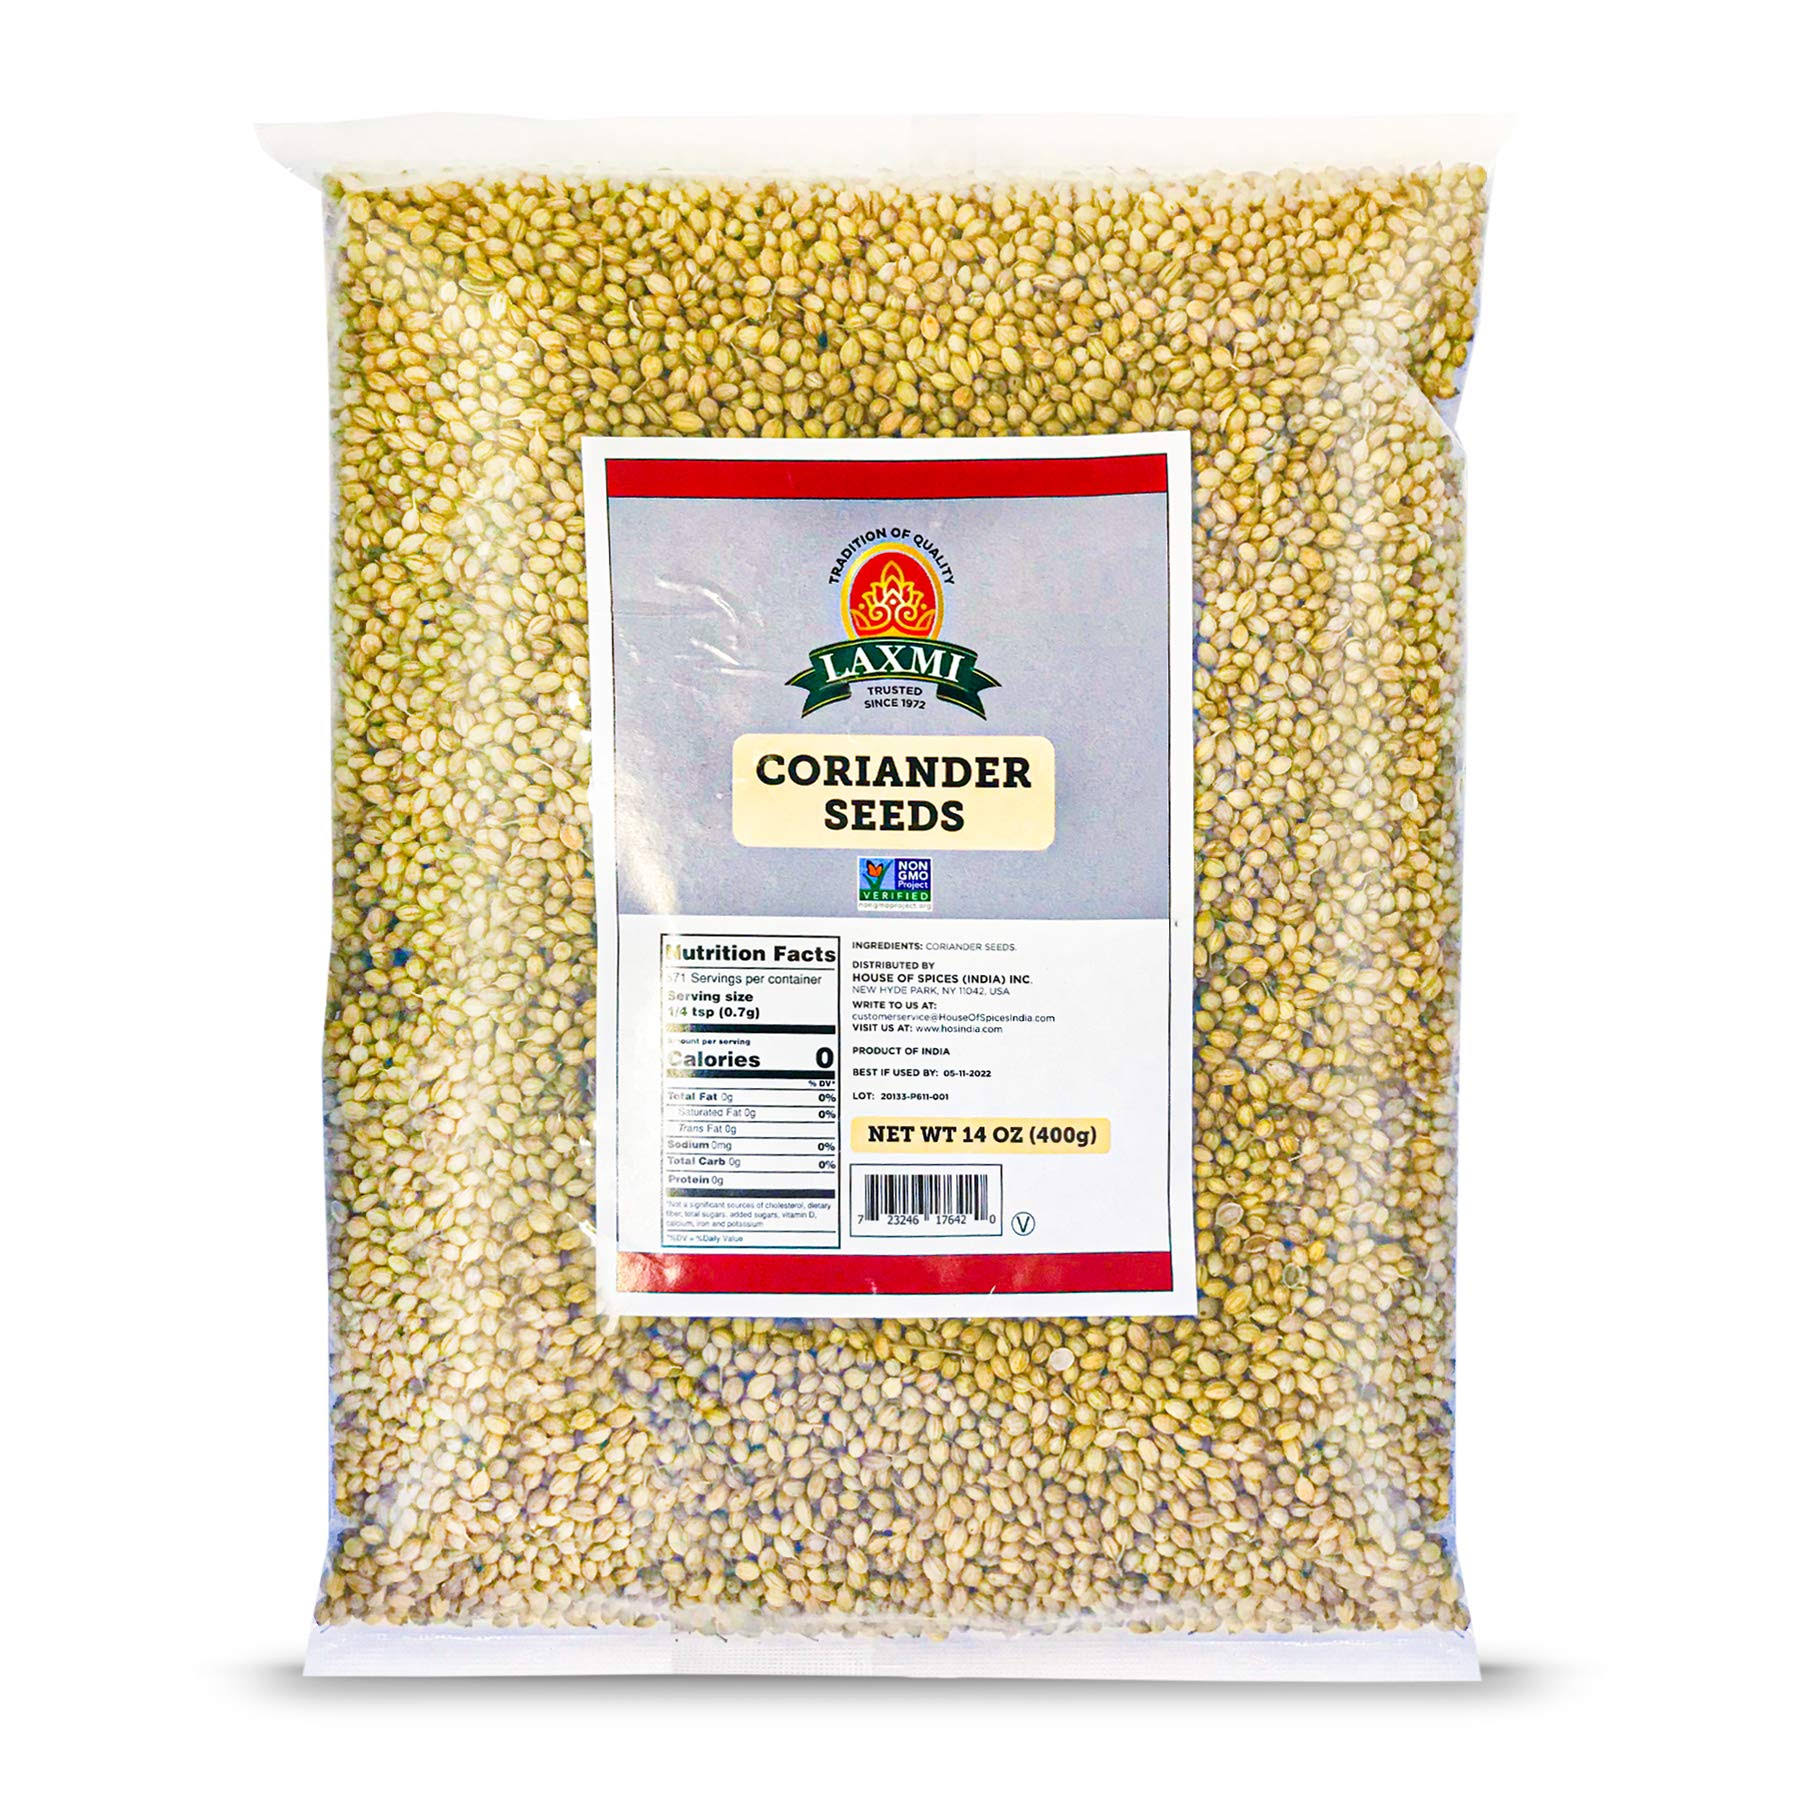 Laxmi All-Natural Traditional Indian Spices - Coriander Seeds, (400gm)